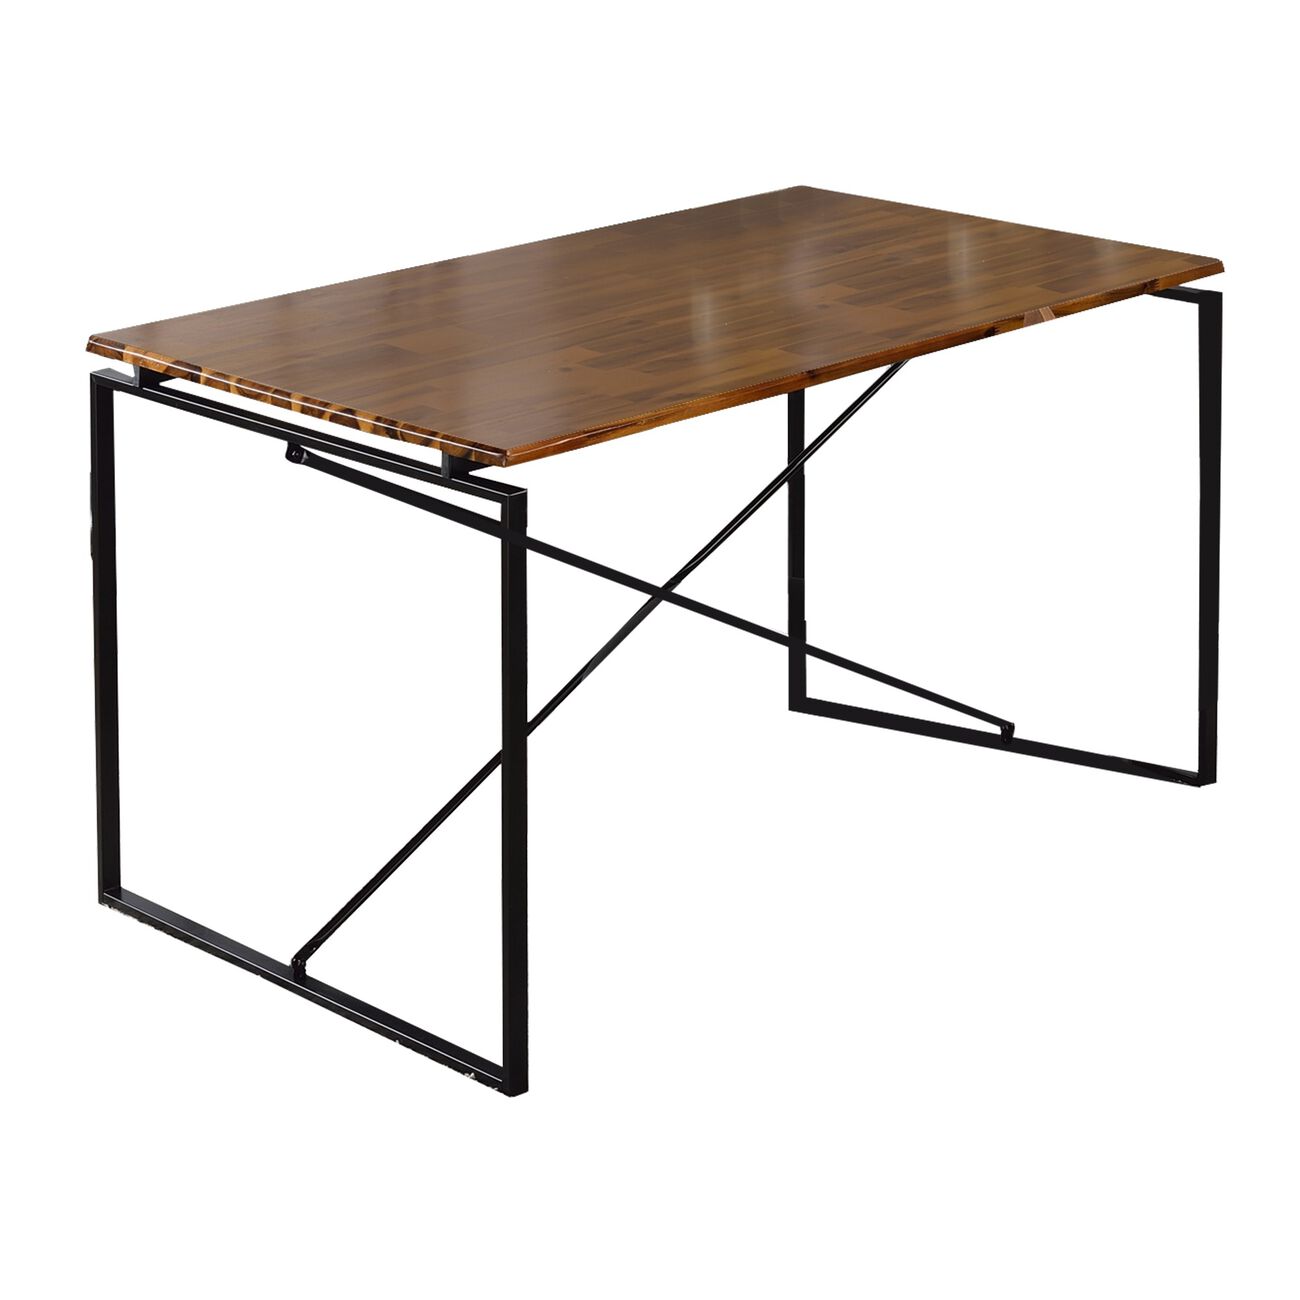 Rectangular Wooden Dining Table with X Shape Metal Base, Black and Brown